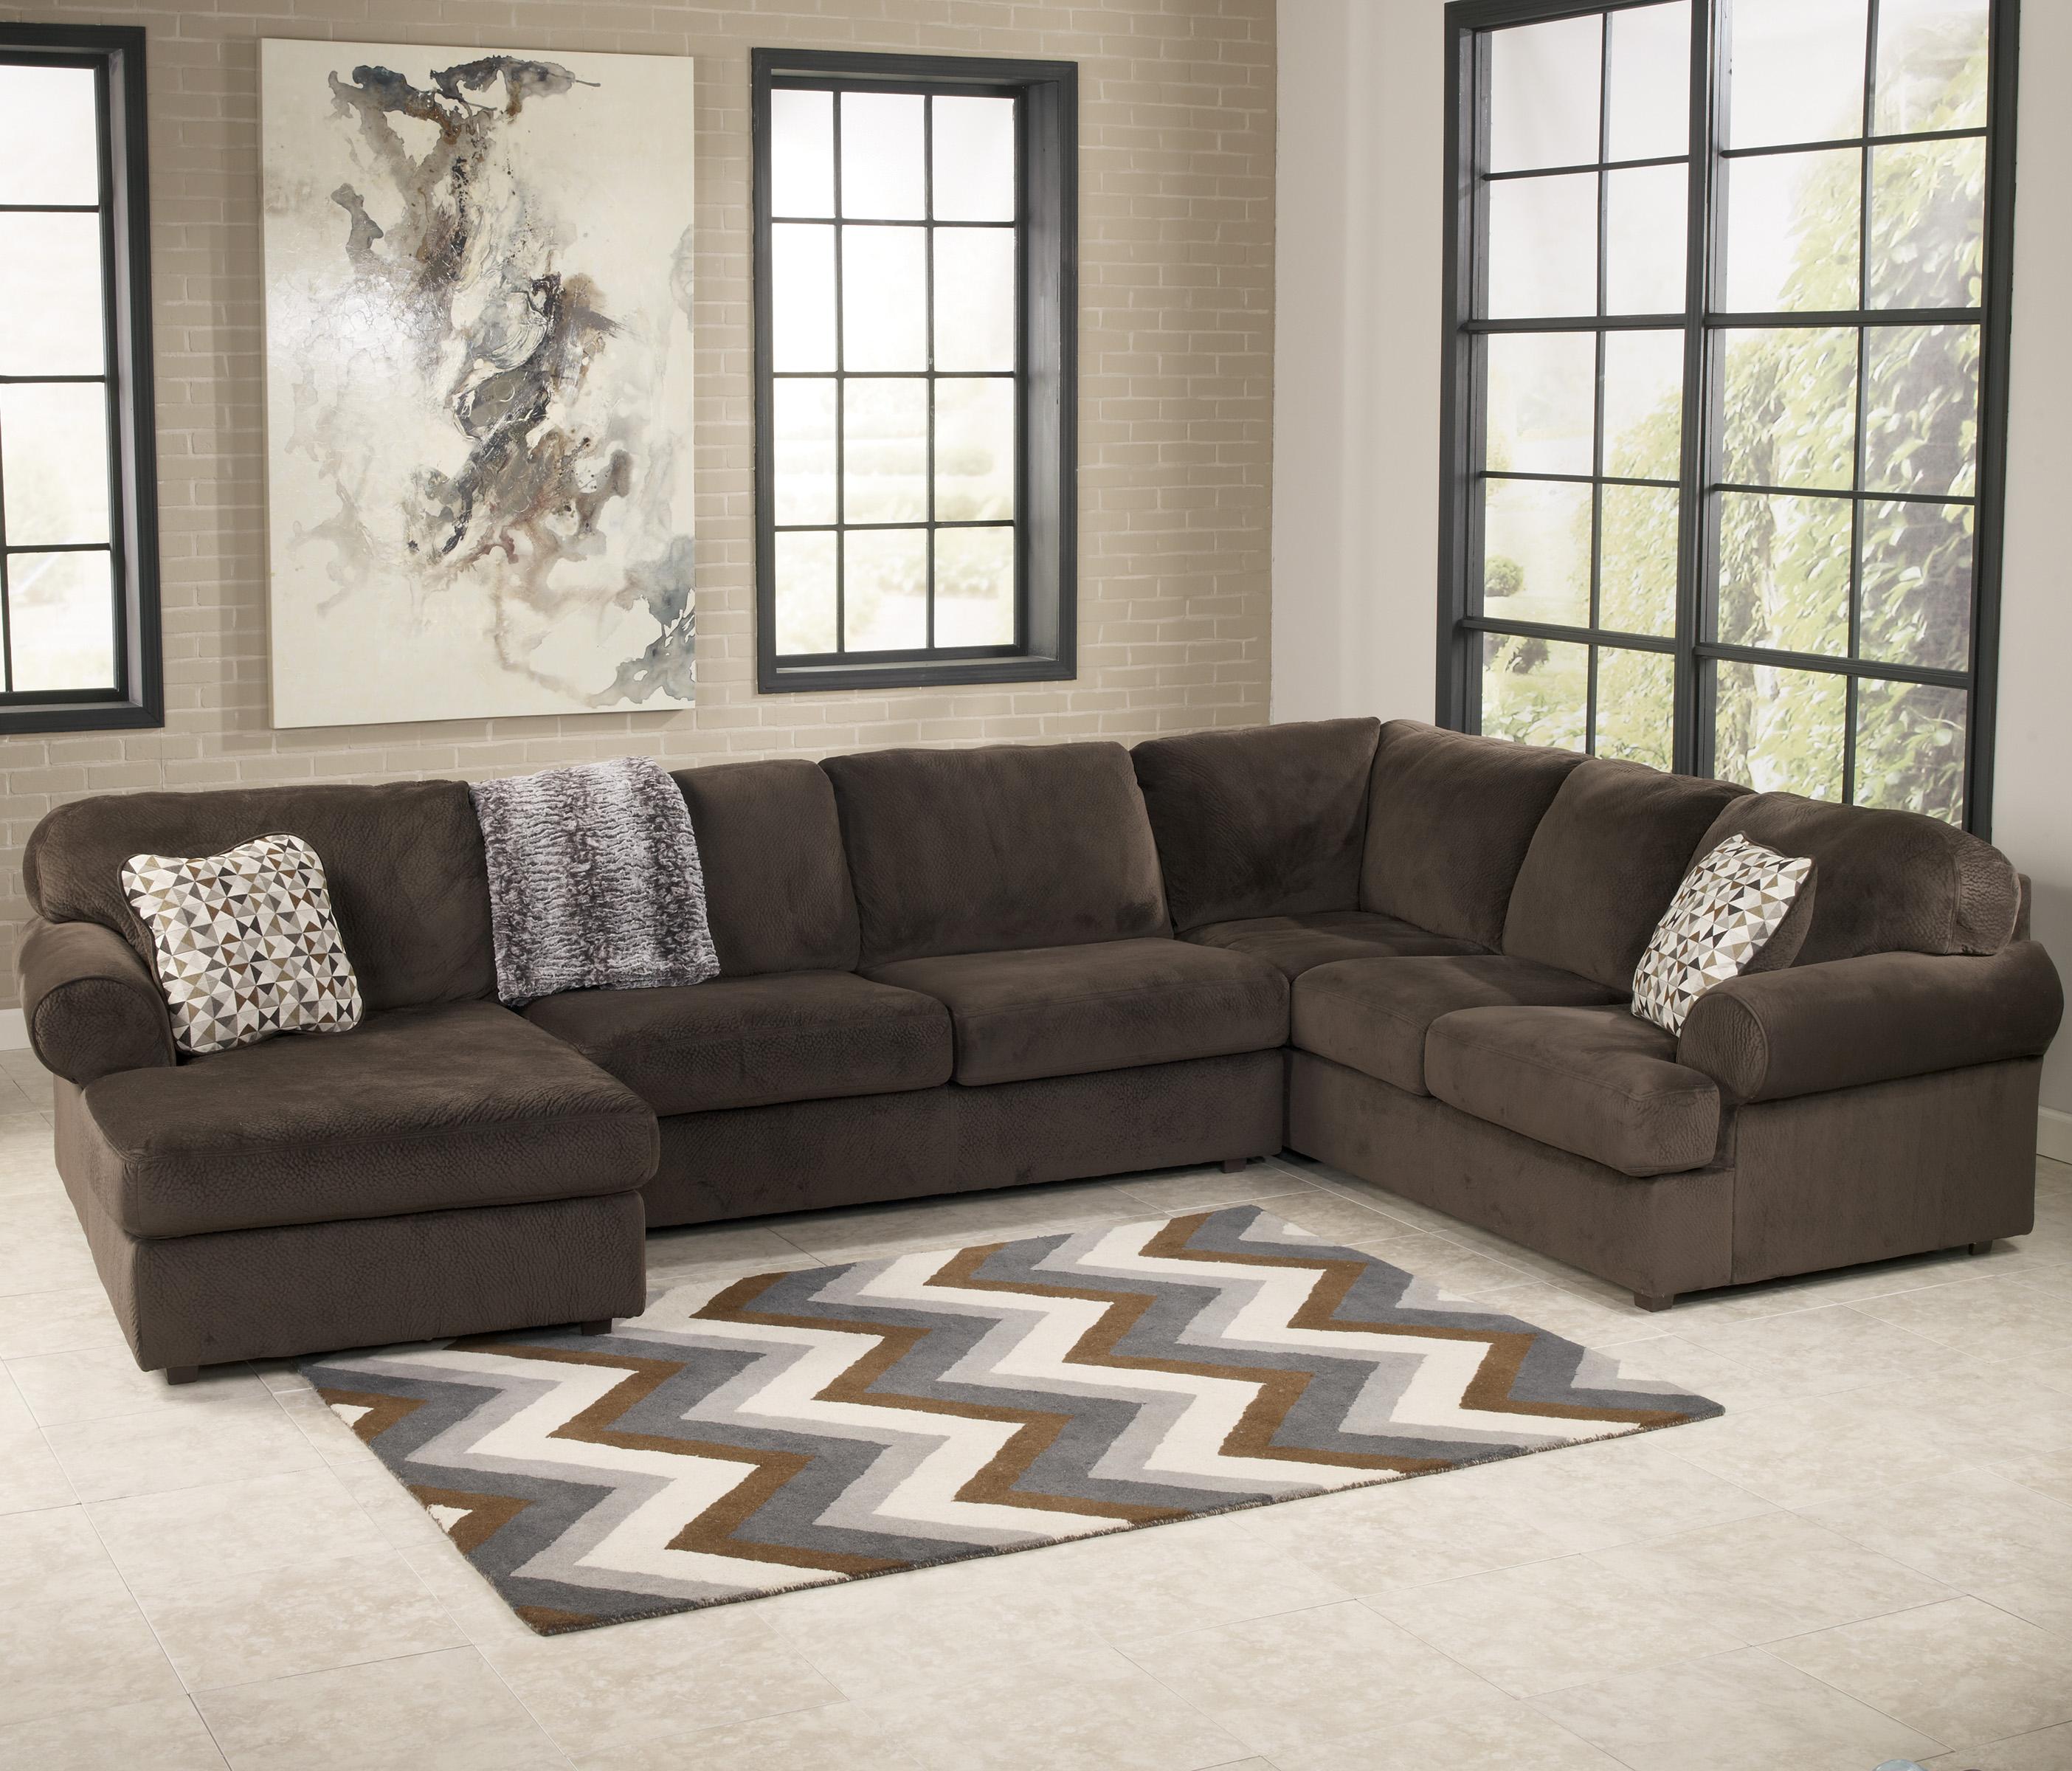 Sectional Sofa with Left Chaise